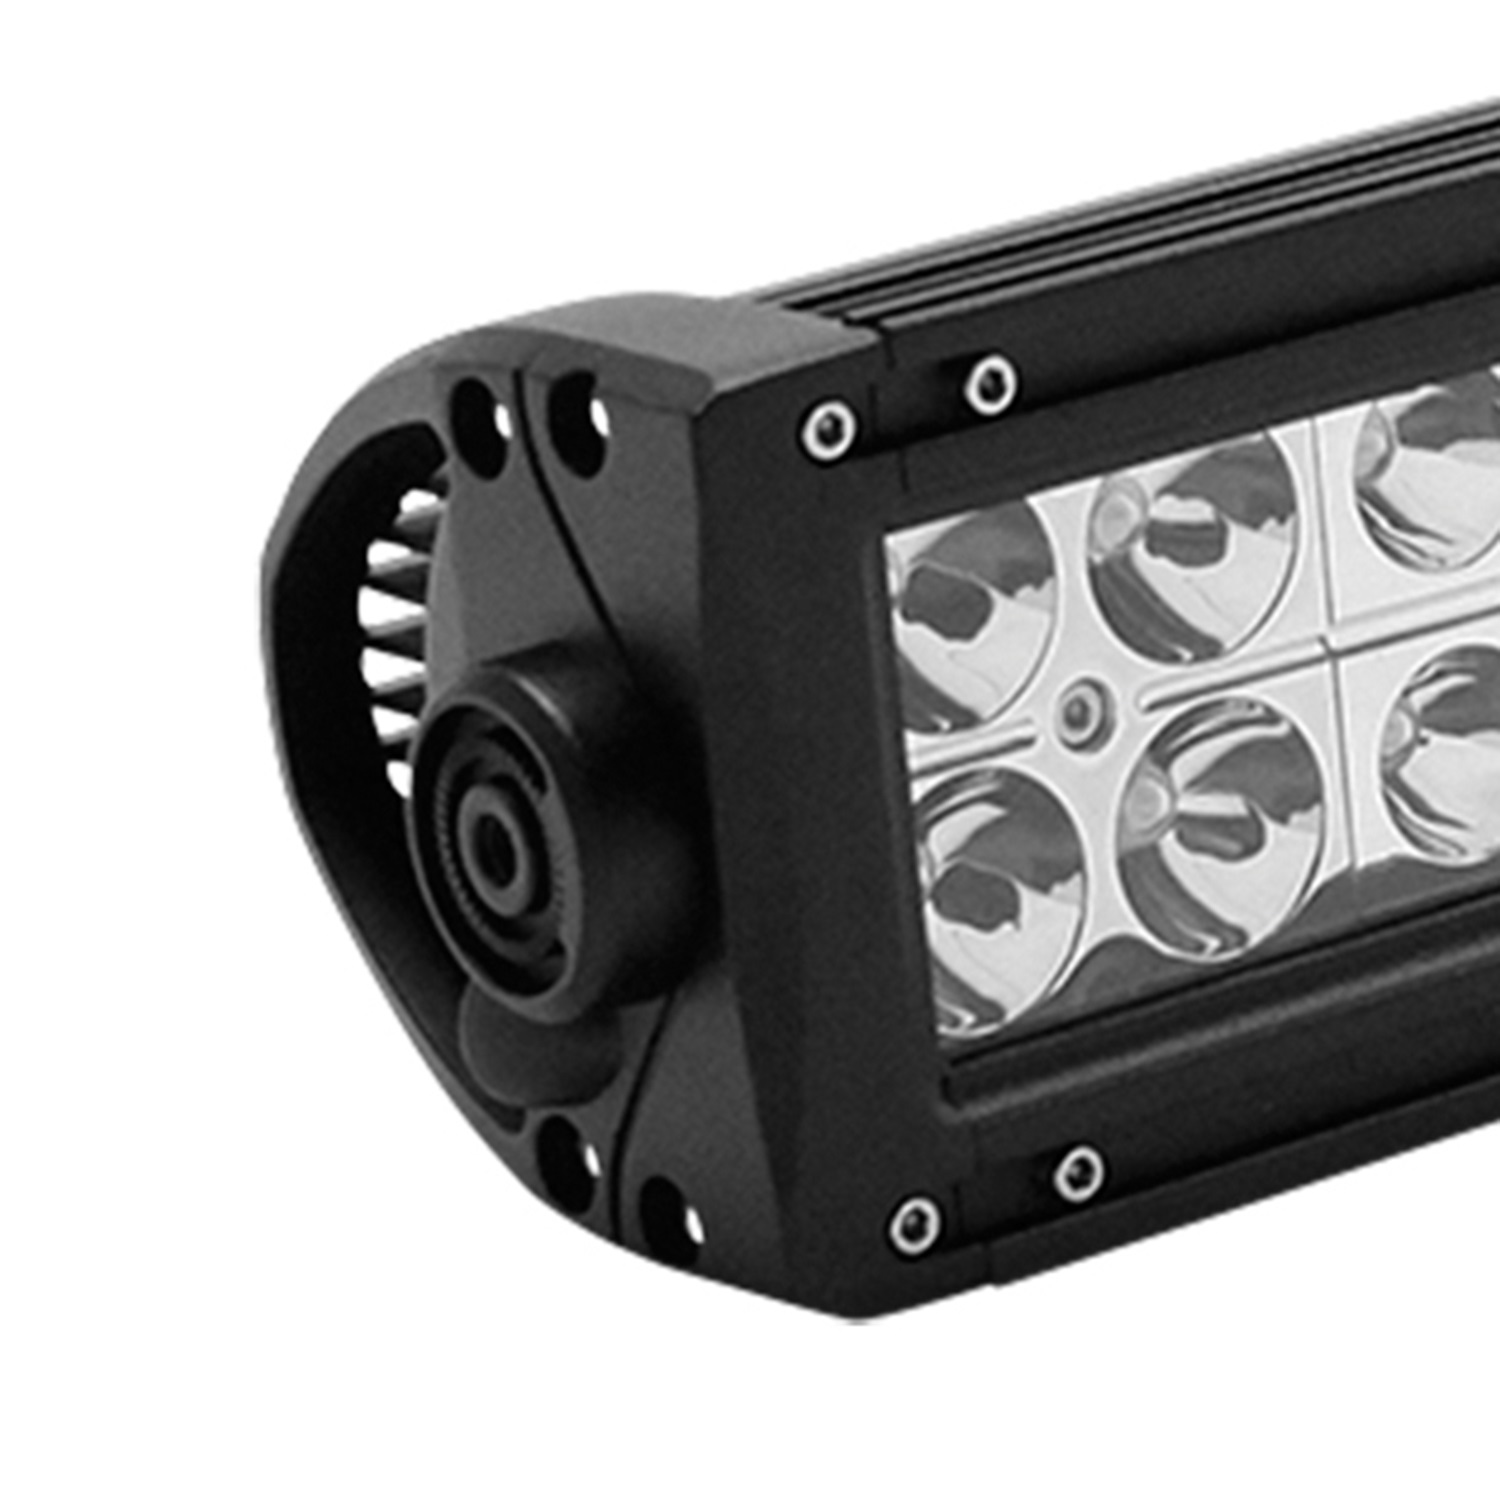 Picture of Westin 09-13206S Ef2 Led Light Bar